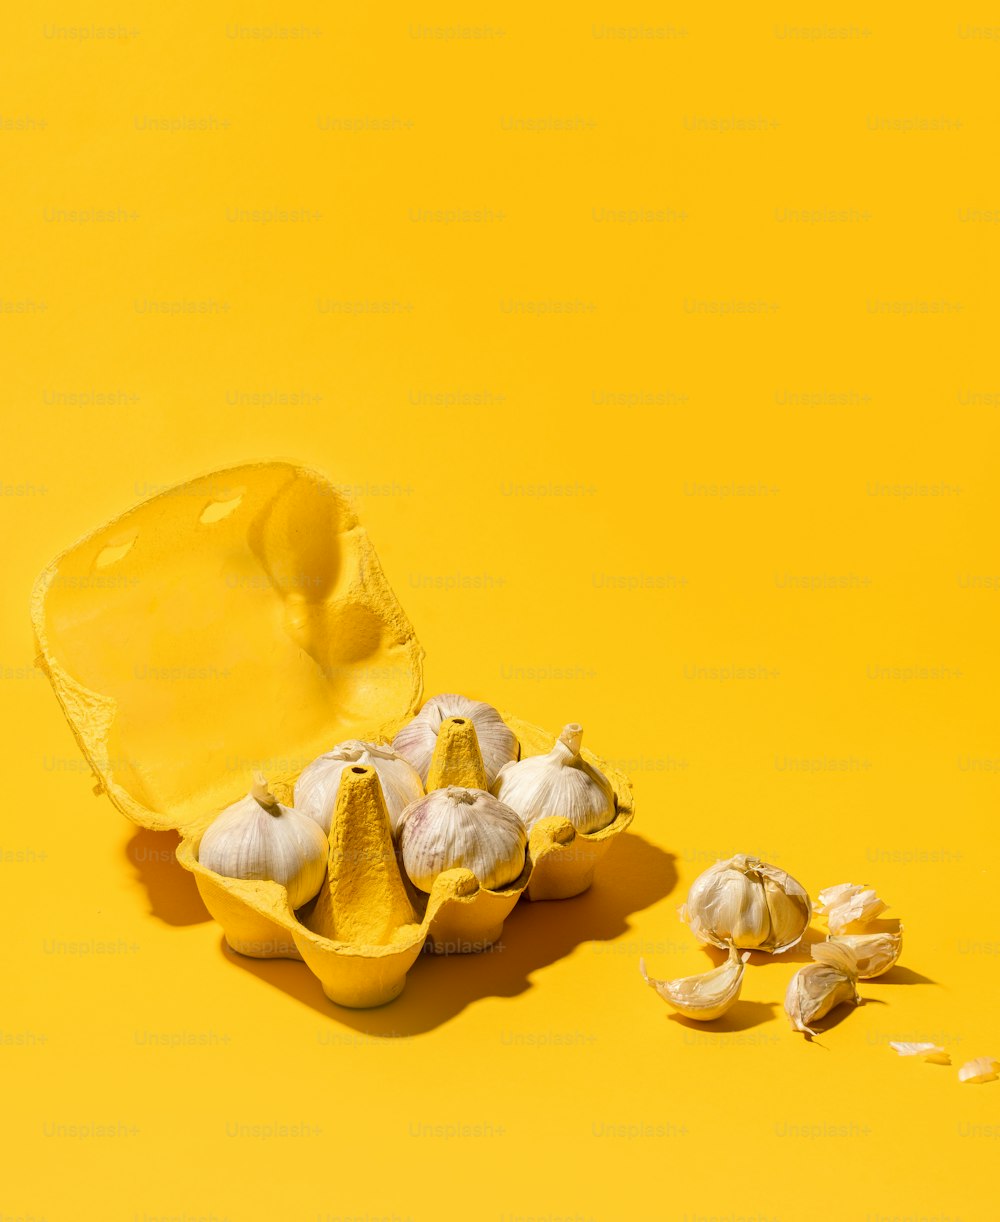 a peeled egg shell next to garlic on a yellow background